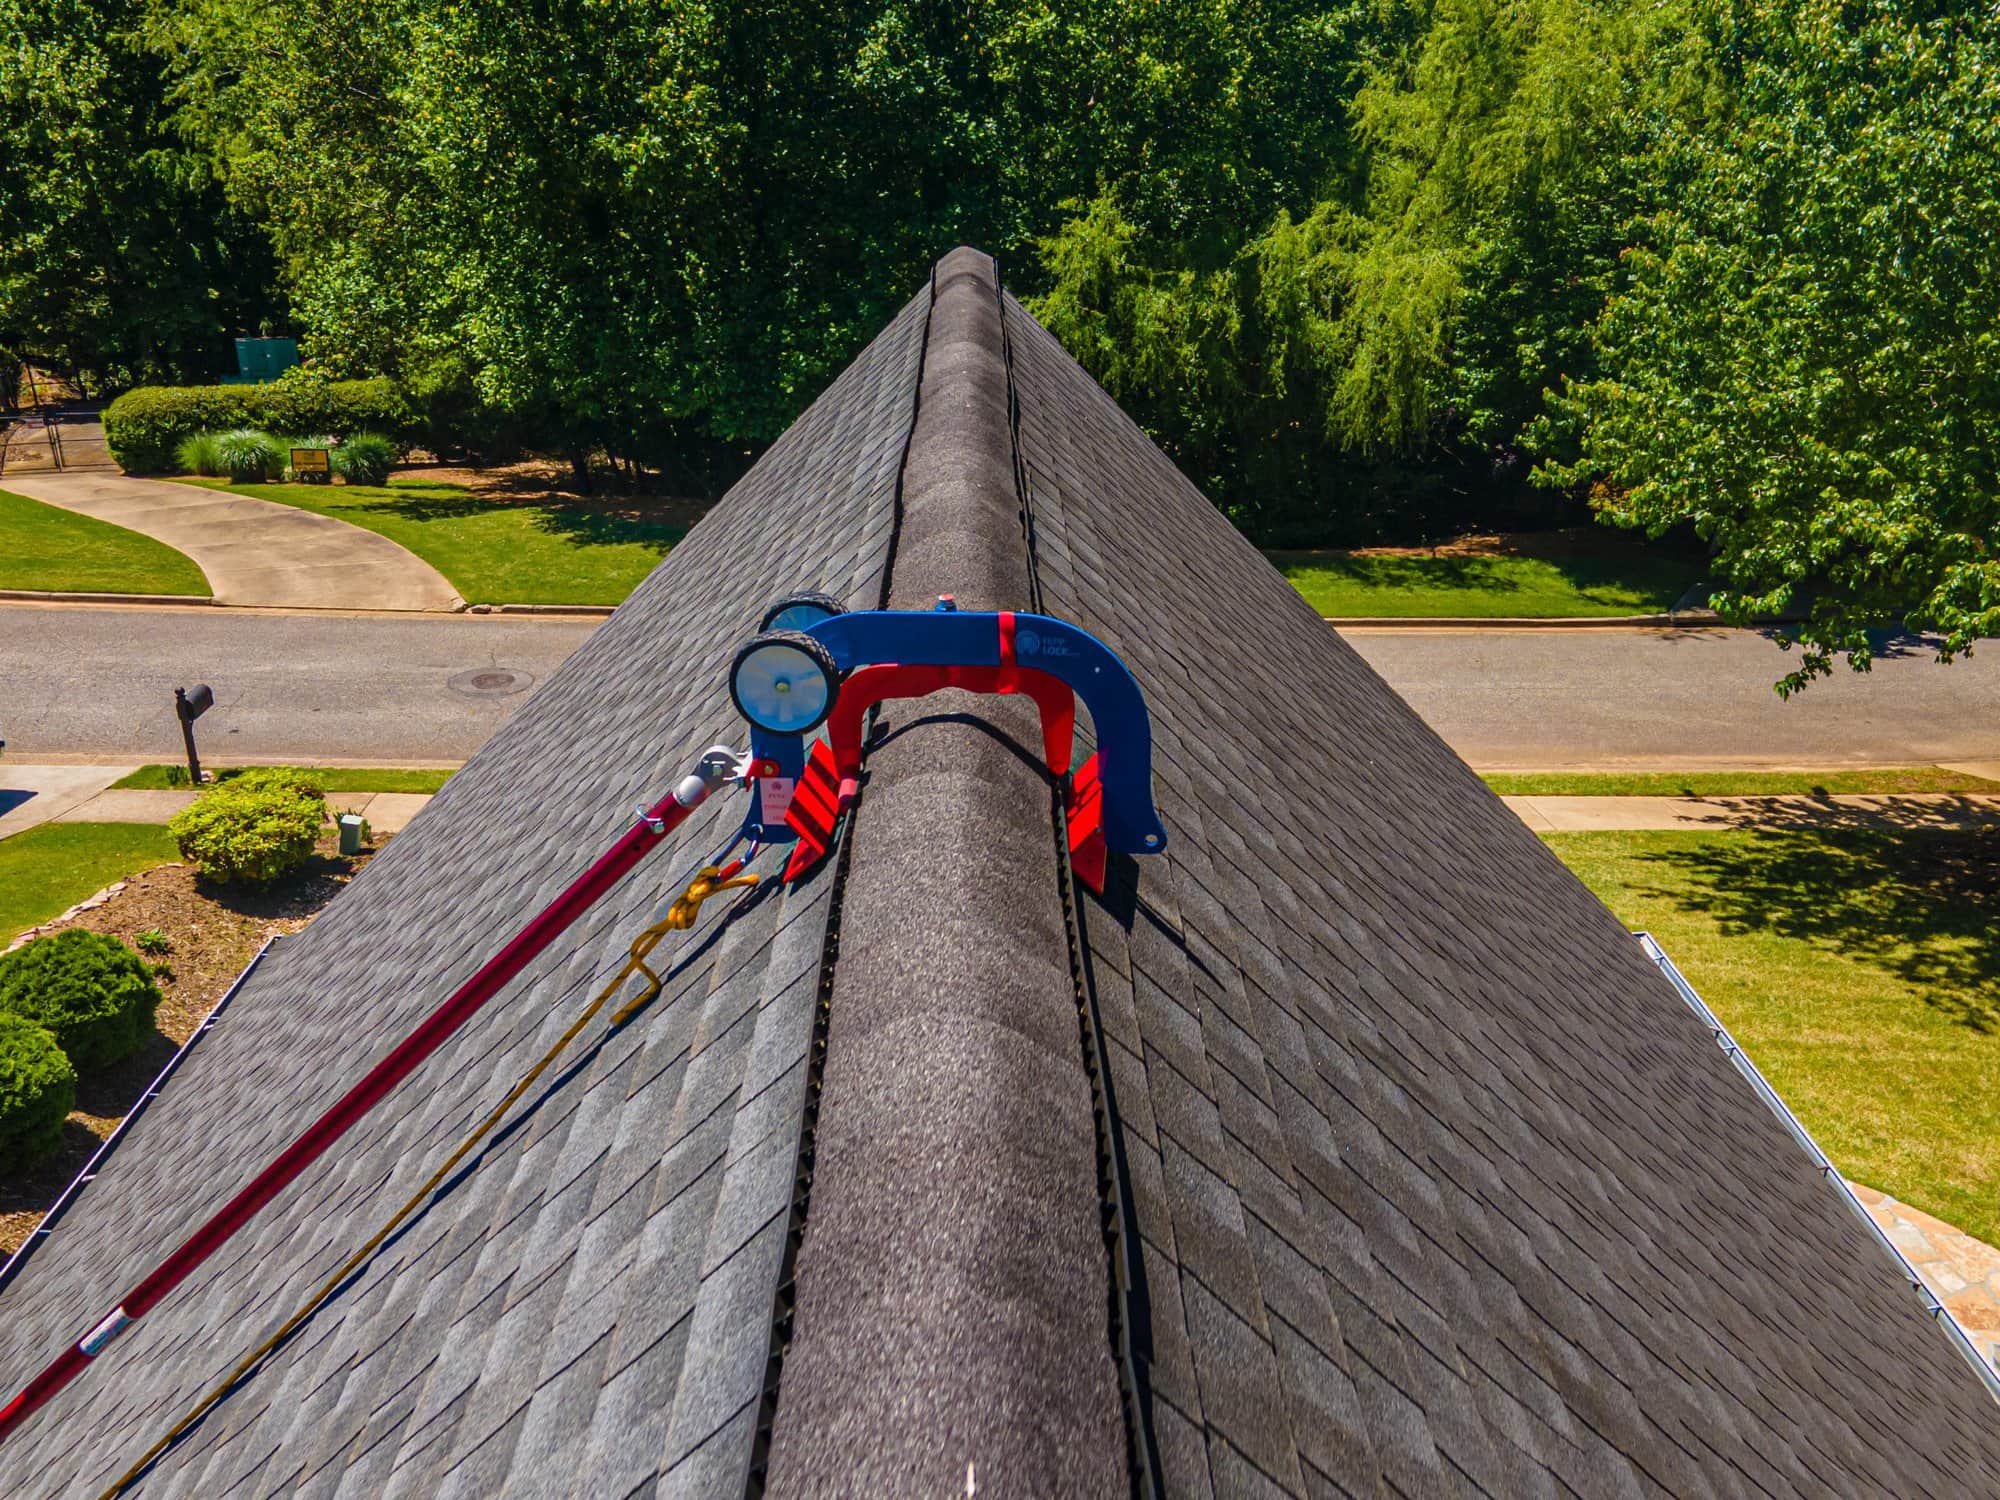 About Steep Roofs and How to Safely Work on Them